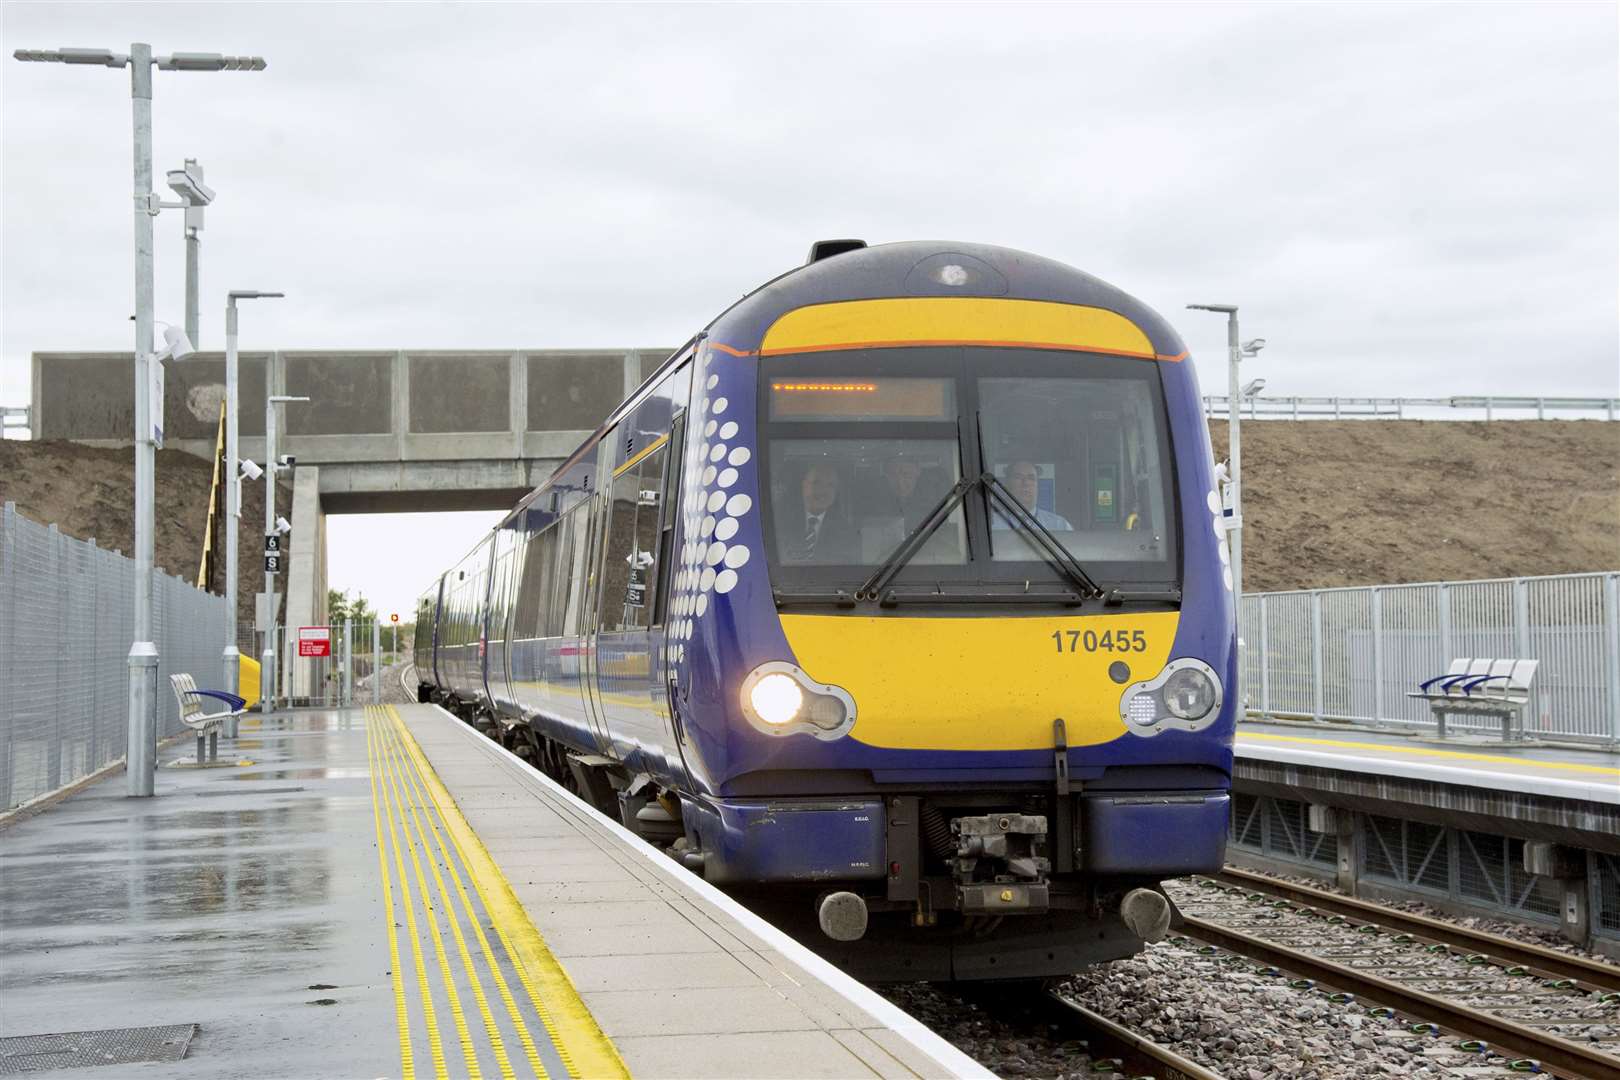 A ScotRail train at Forres on the Inverness-Aberdeen line. Picture: Daniel Forsyth. Image No.039367.